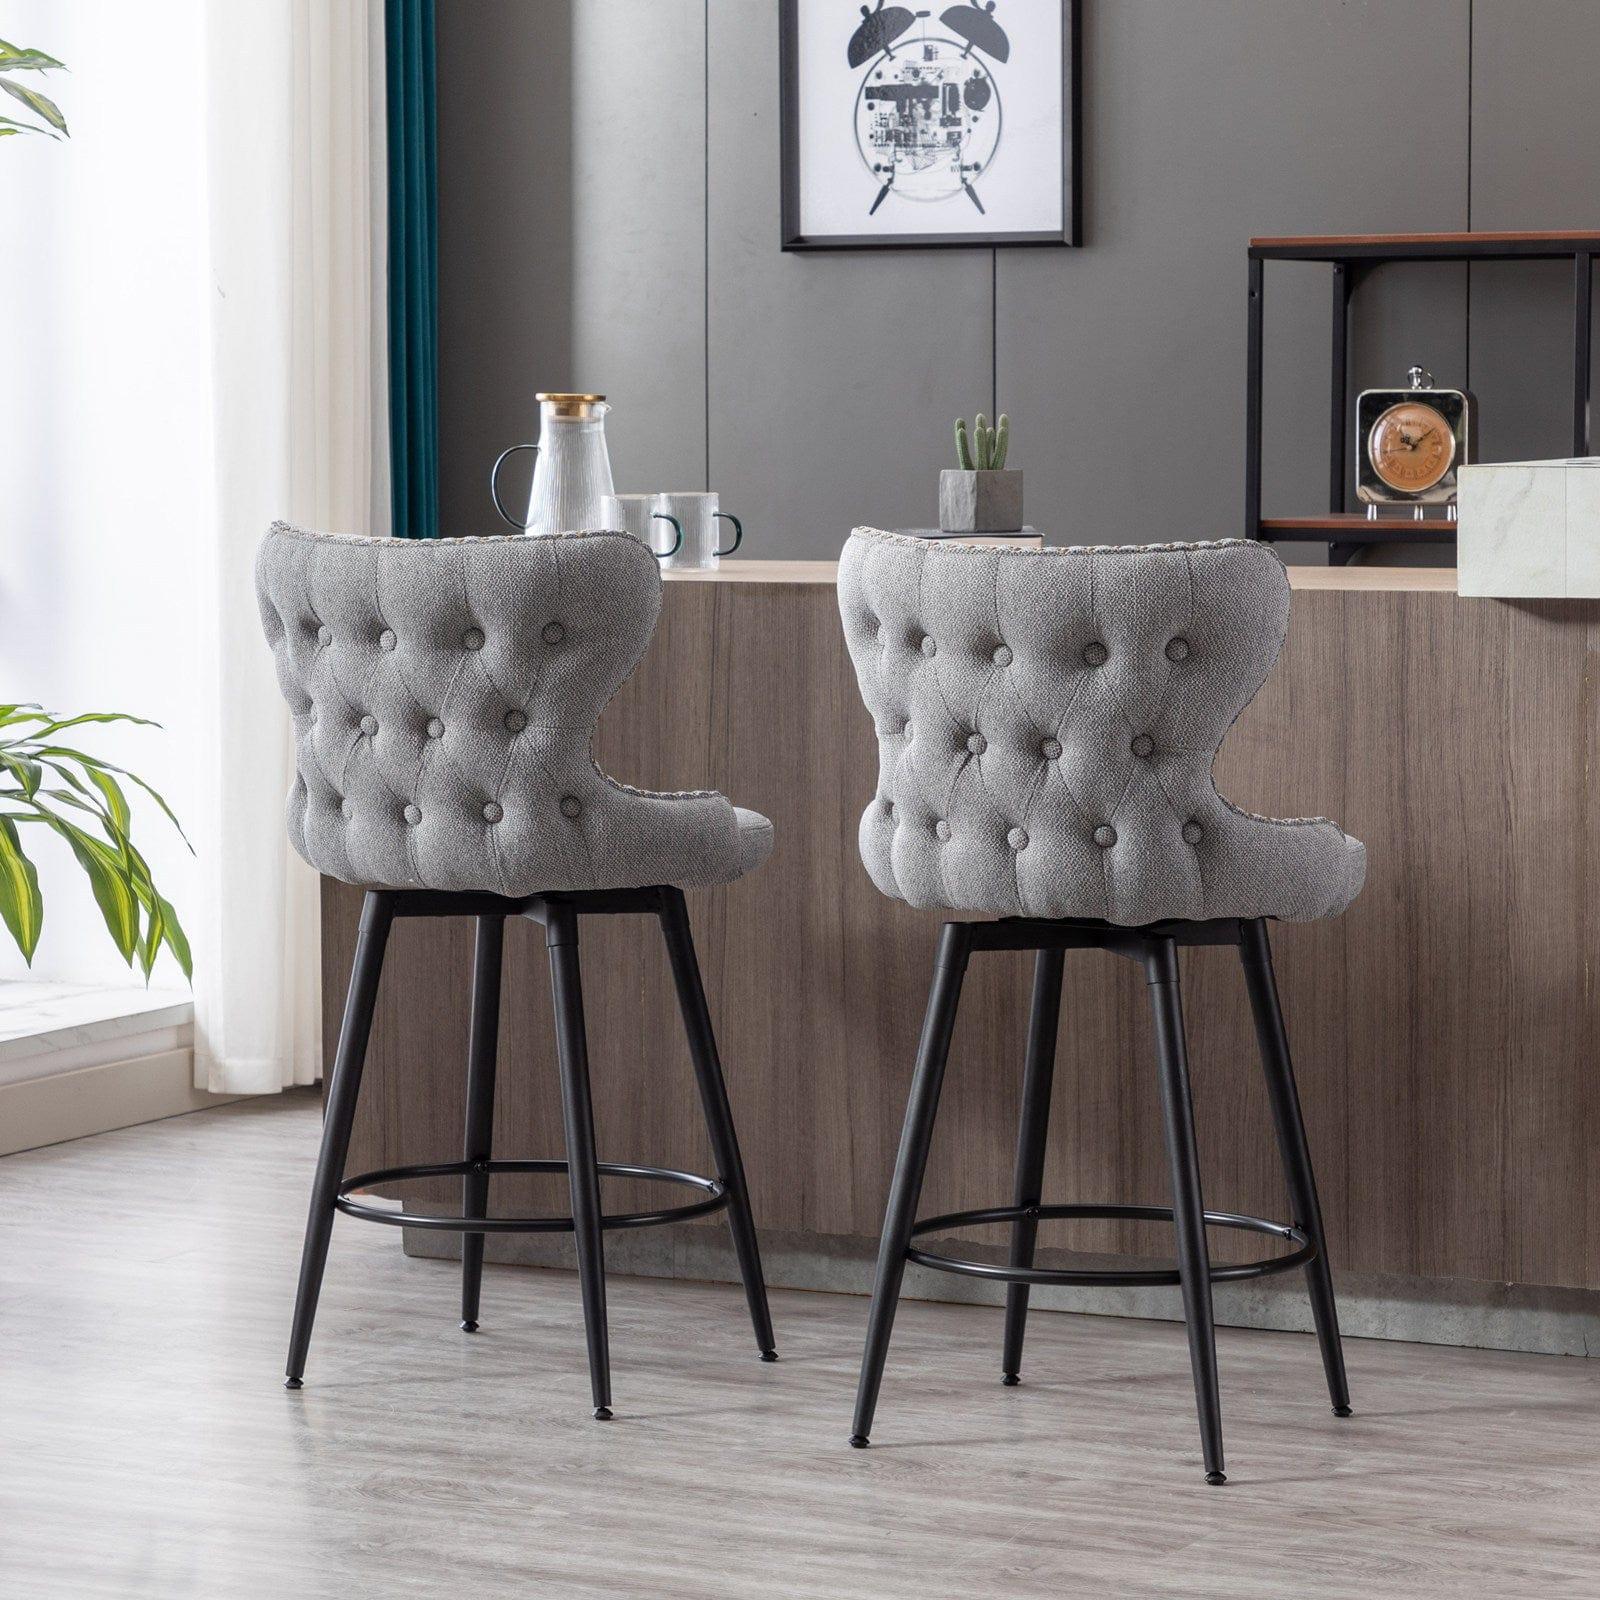 Shop A&A Furniture,Counter Height 25" Modern Linen Fabric Counter Chairs,180° Swivel Bar Stool Chair for Kitchen,Tufted Cupreous Nailhead Trim Burlap Bar Stools with Metal Legs,Set of 2 (Gray) Mademoiselle Home Decor